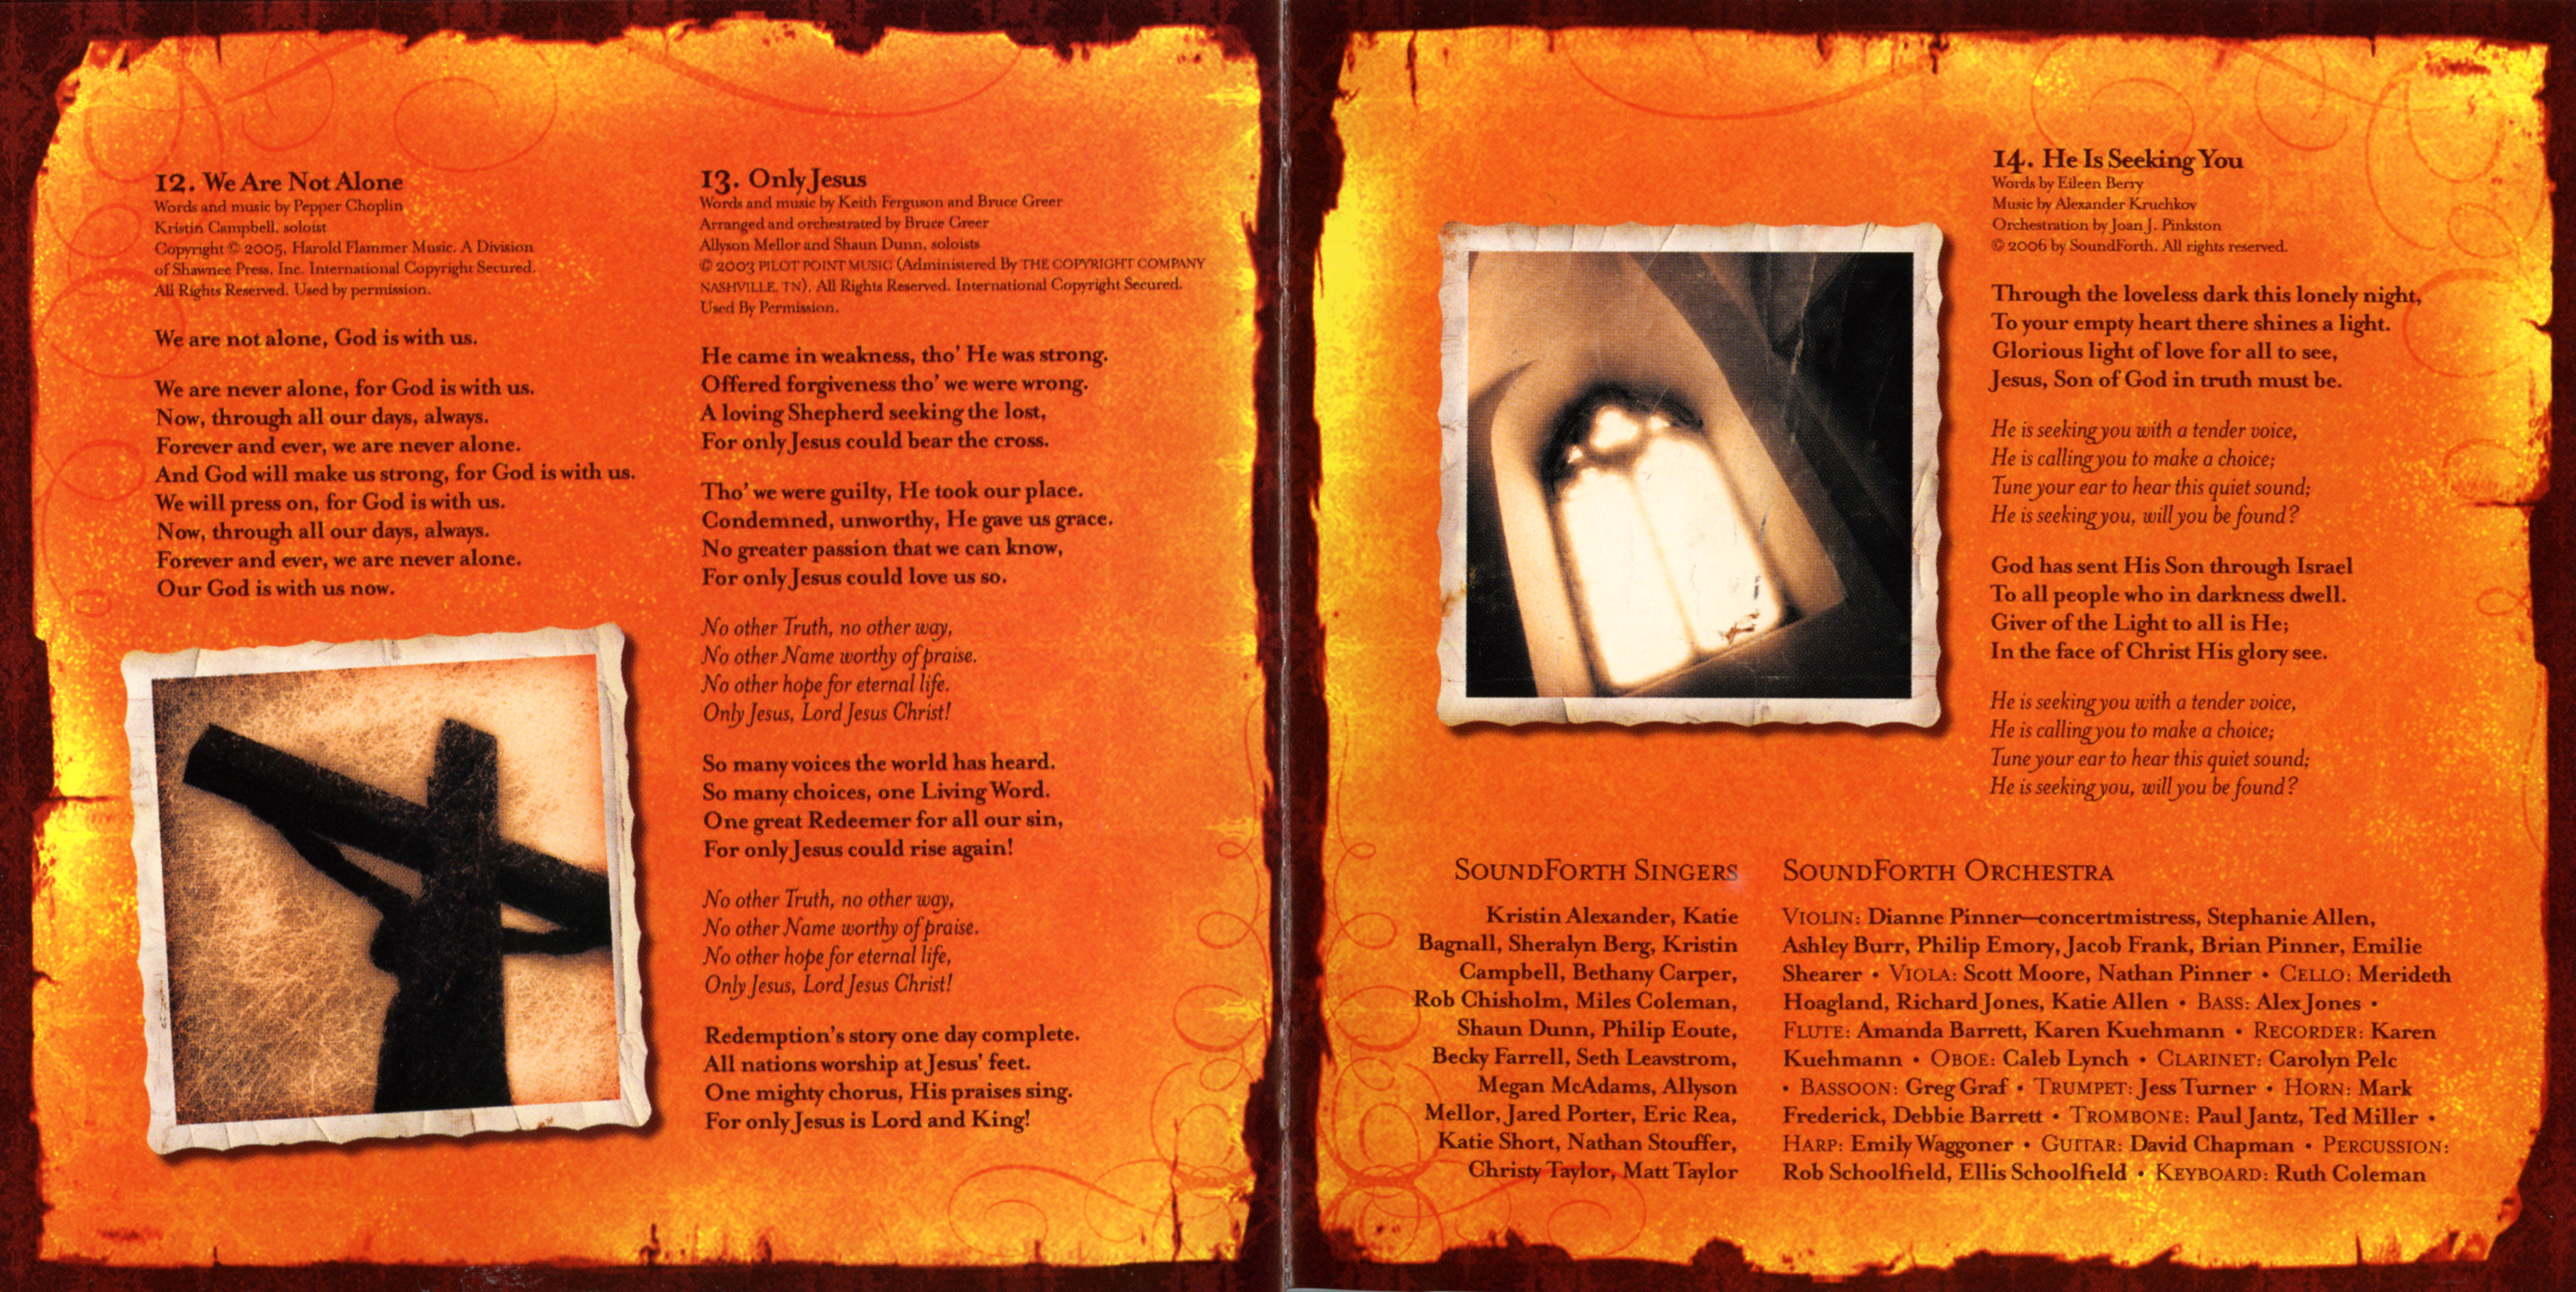 A_Quiet_Heart_The_Complete_CD_2006_Booklet_Side_7_To_8.jpg